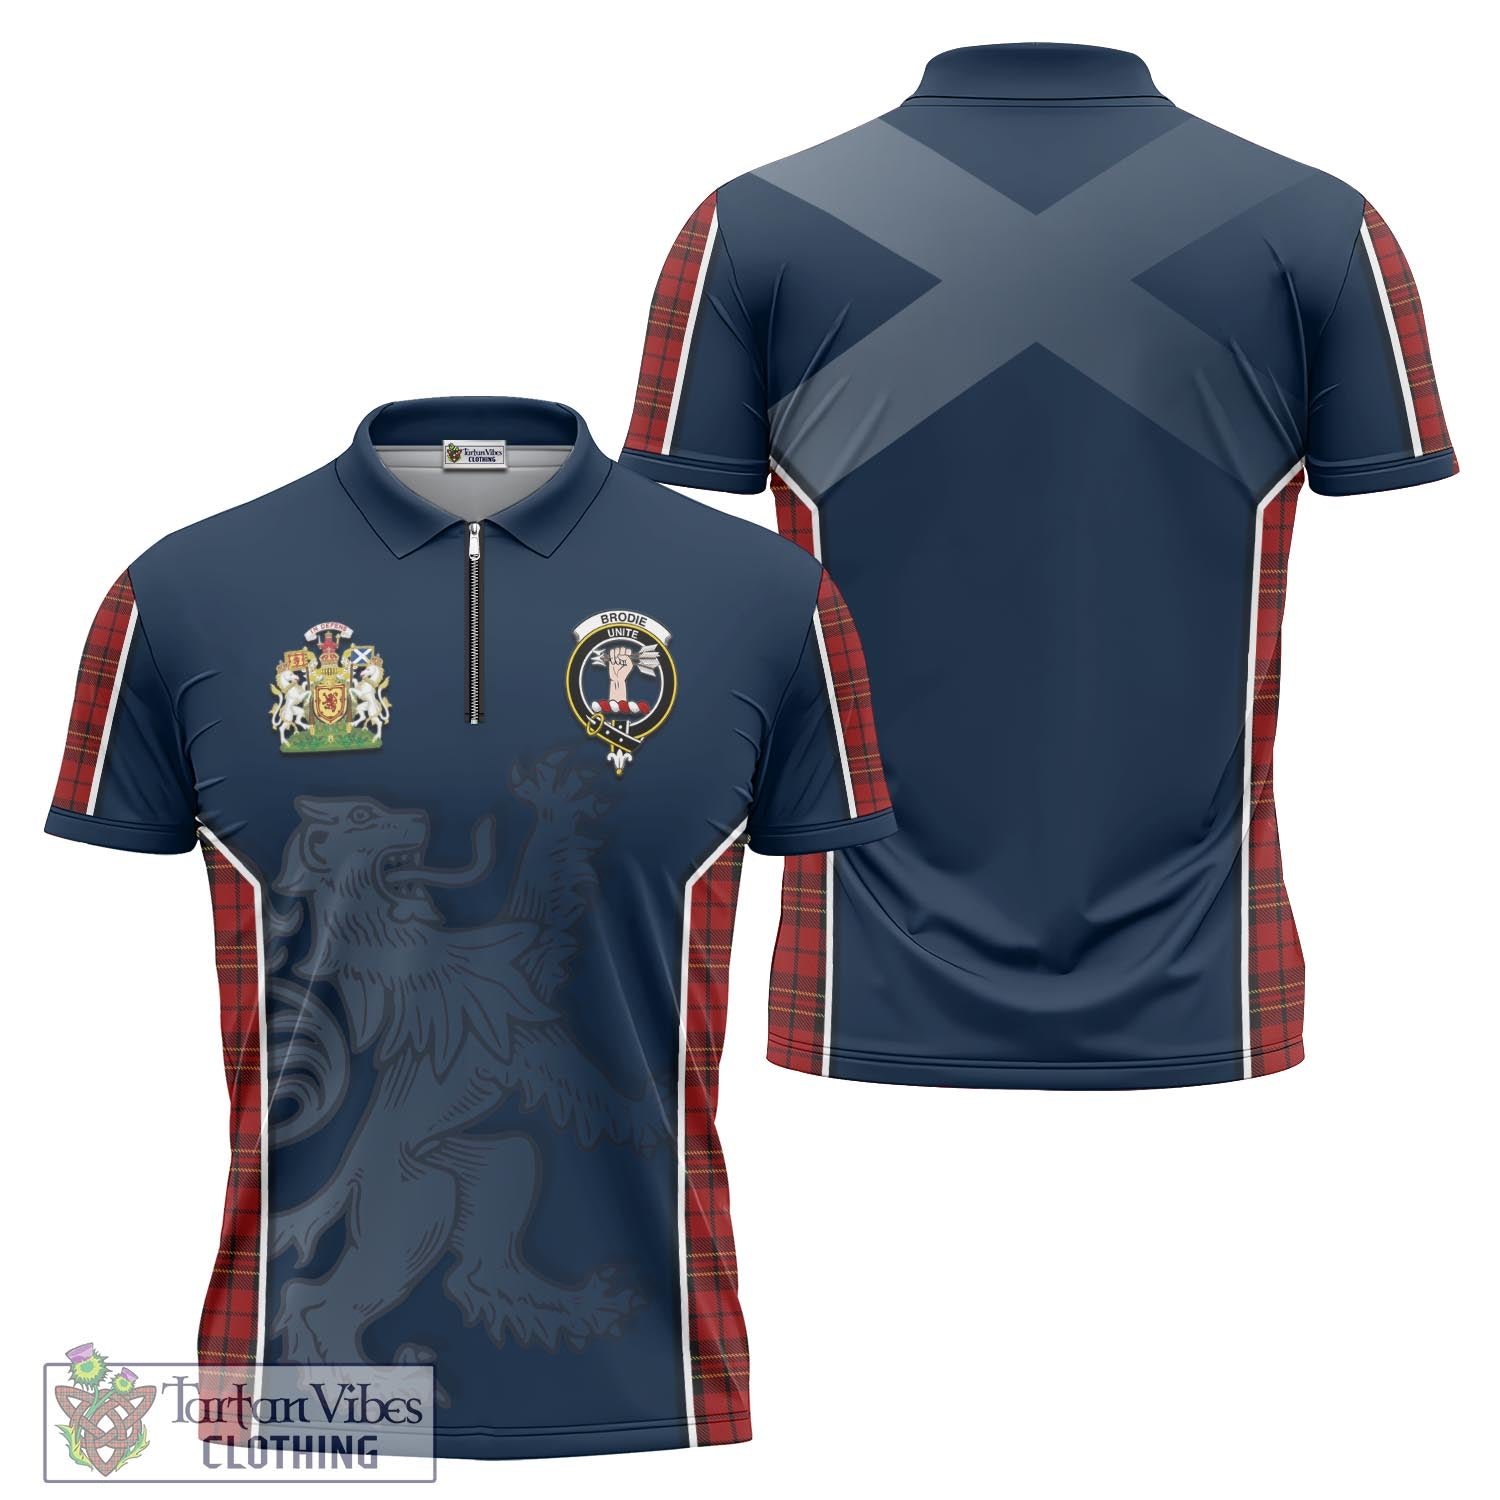 Tartan Vibes Clothing Brodie Tartan Zipper Polo Shirt with Family Crest and Lion Rampant Vibes Sport Style